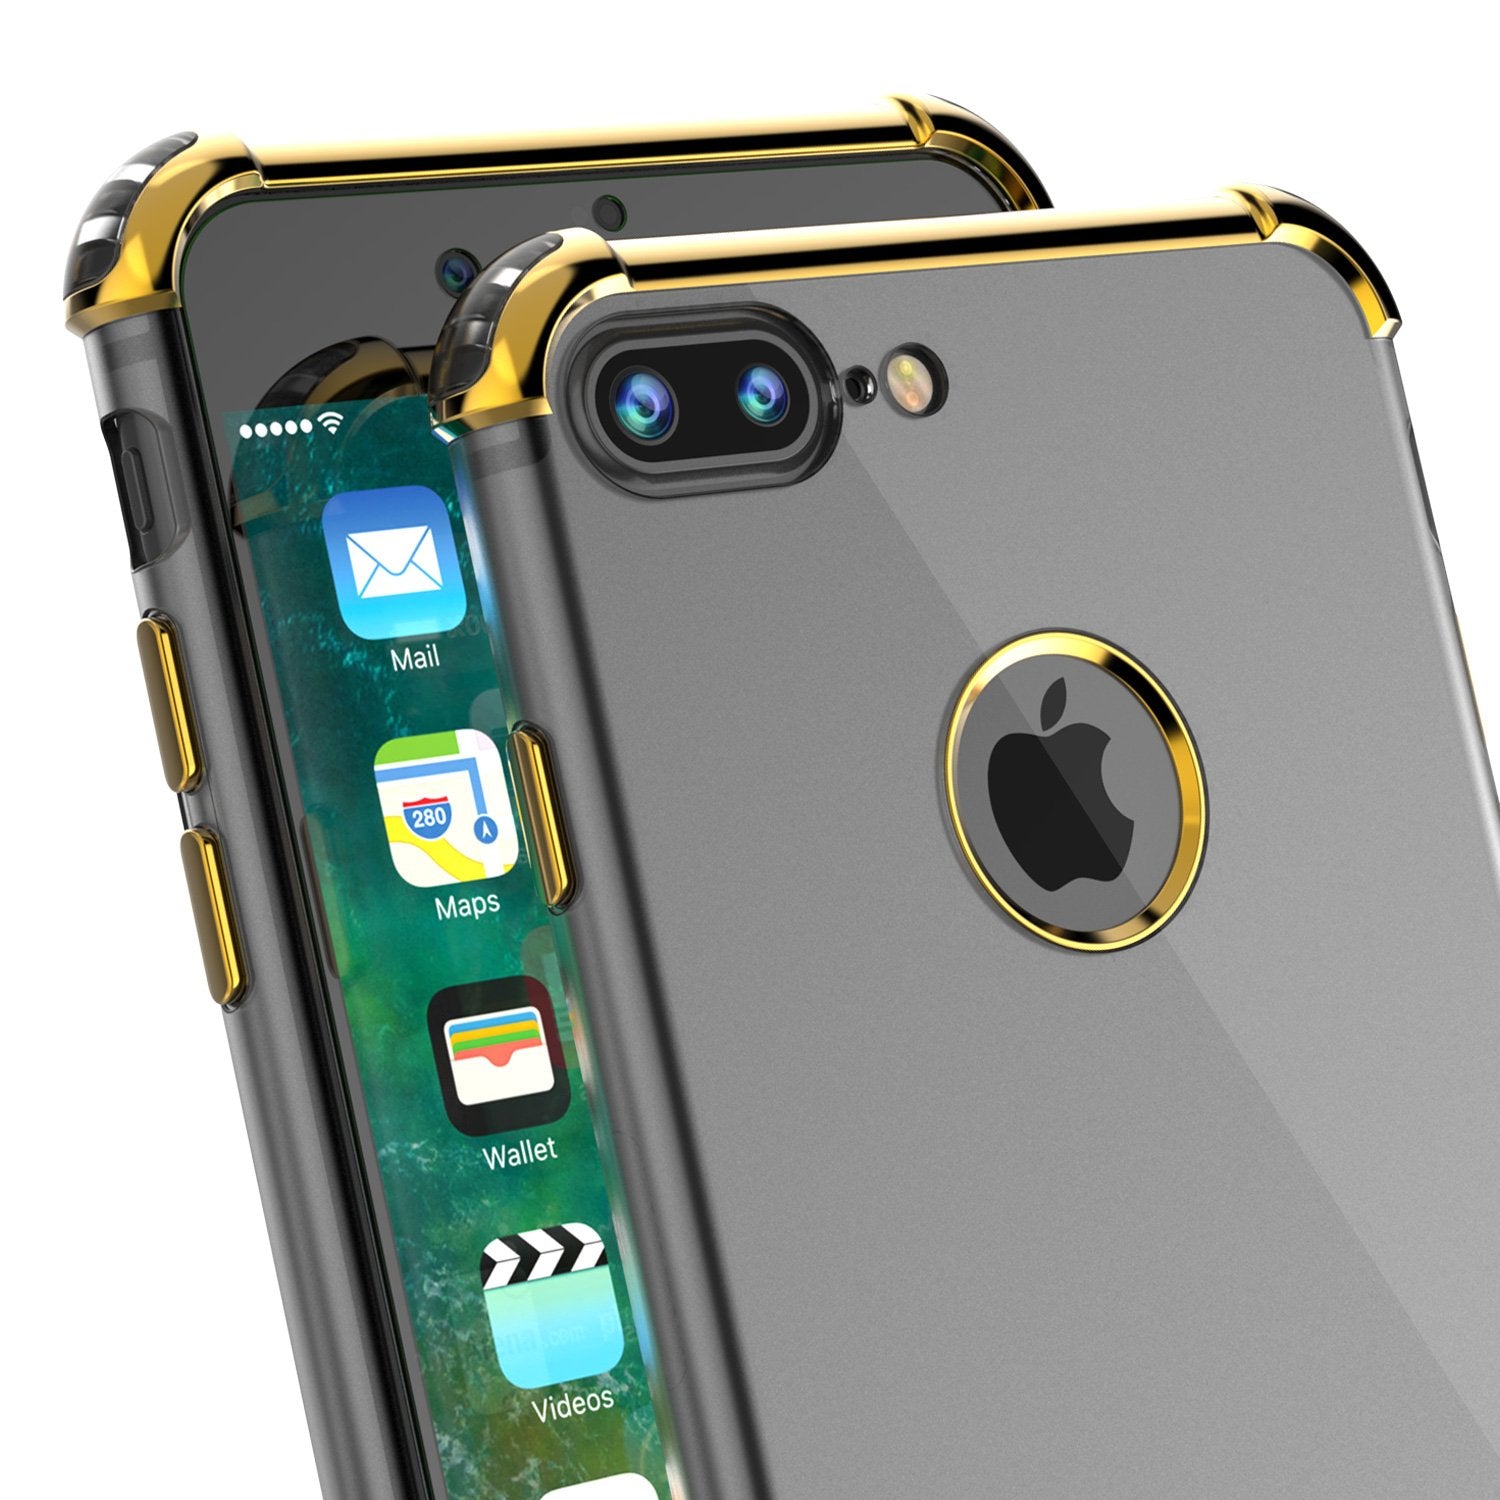 iPhone 8 PLUS Case, Punkcase [BLAZE SERIES] Protective Cover W/ PunkShield Screen Protector [Shockproof] [Slim Fit] for Apple iPhone 7/8/6/6s PLUS [Gold]